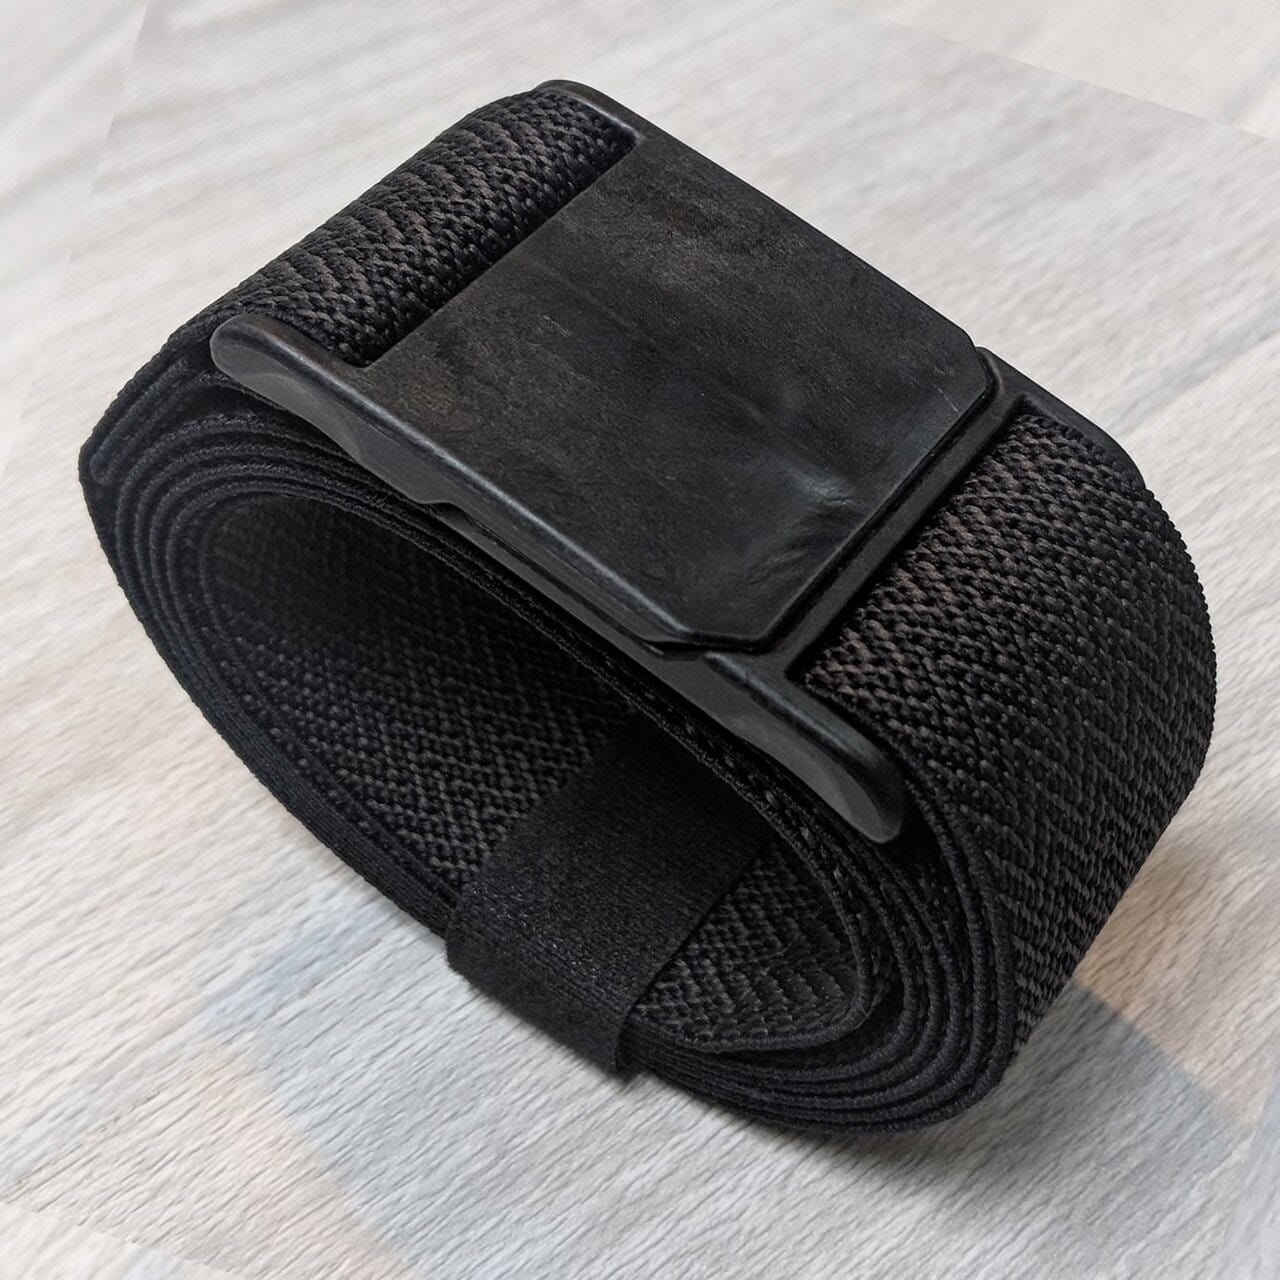 The M series belt with a magnetic buckle